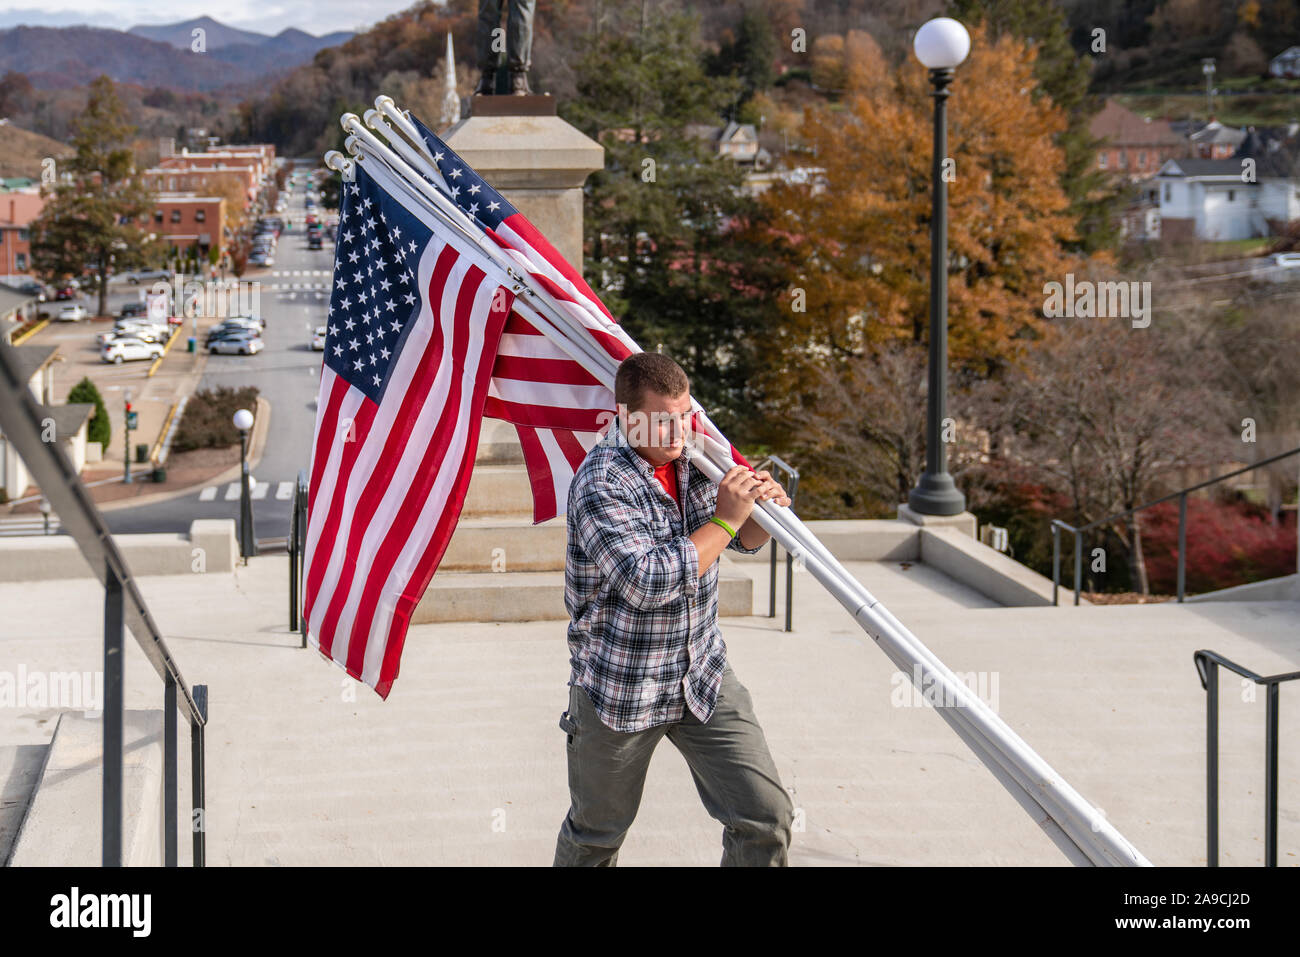 Worker carries American flags used on courthouse lawn, against a backdrop of mountains. Stock Photo